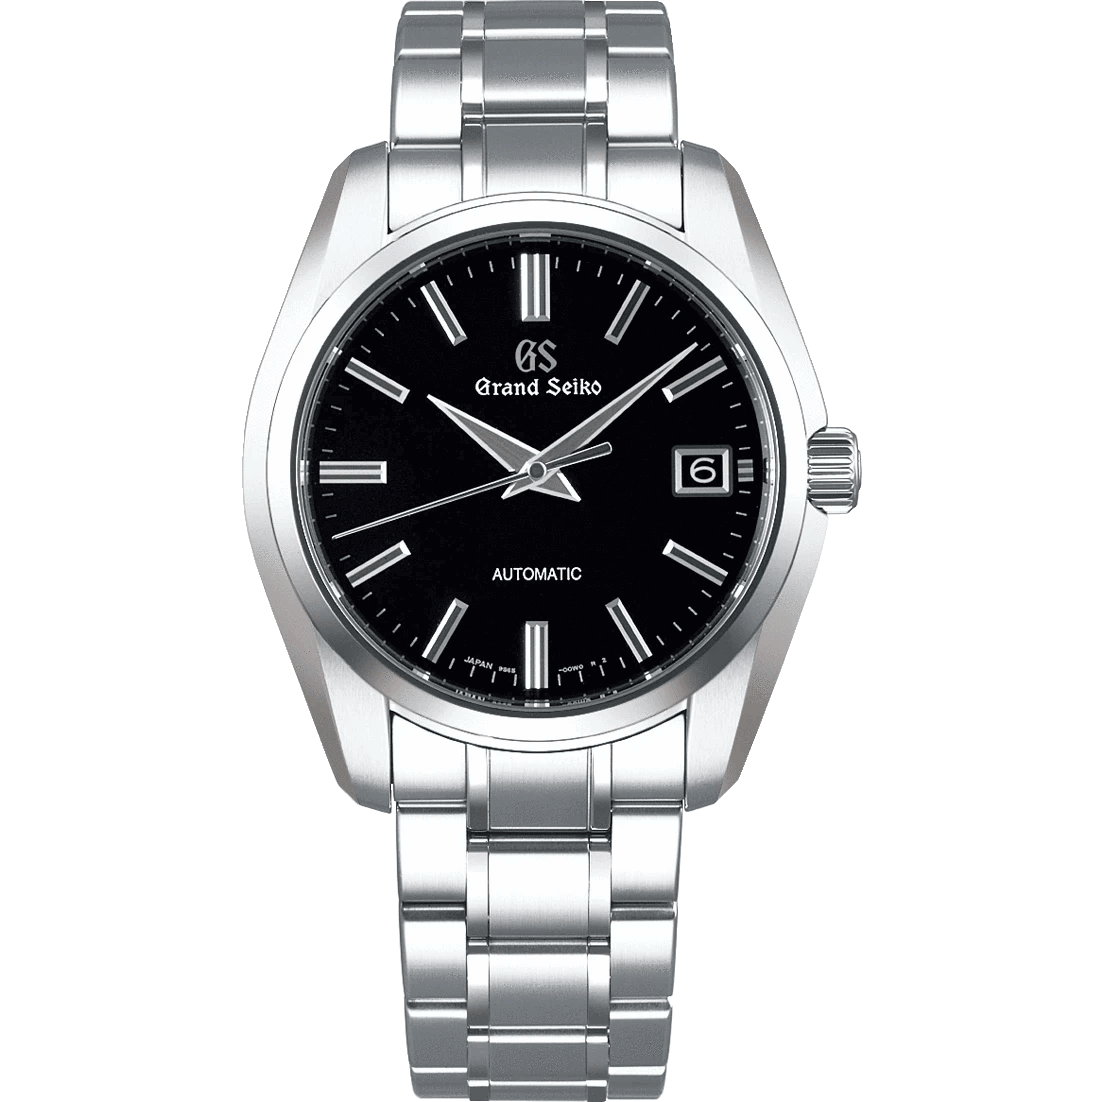 Grand Seiko SBGR317, mechanical automatic 9S65, stainless steel, black dial, men's watches